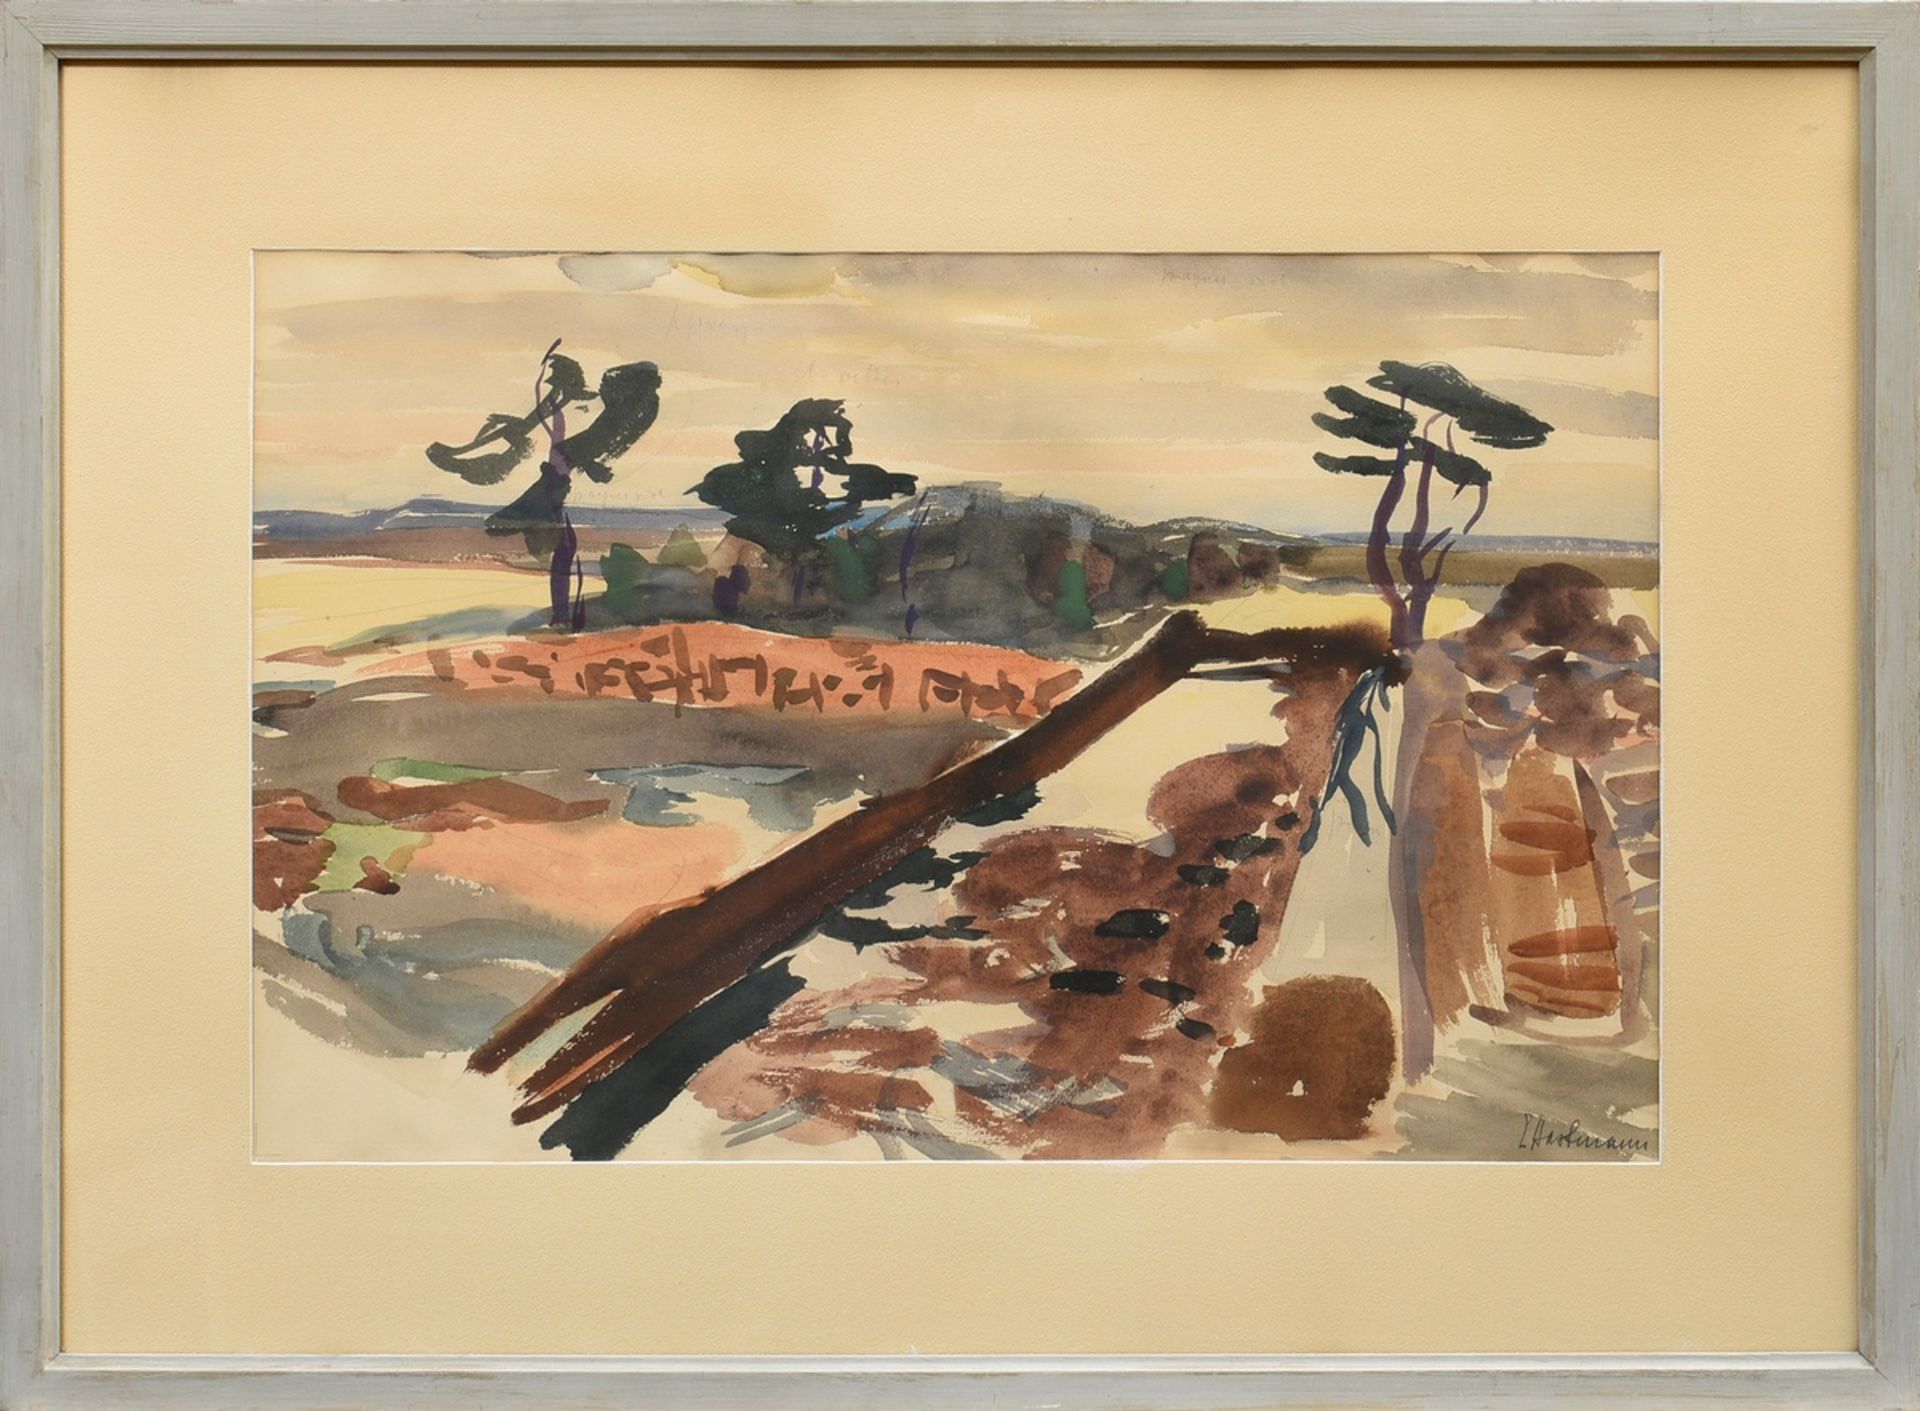 Hartmann, Erich (1886-1974) "Moor landscape" c. 1942, pencil/watercolour, sign. on the lower right, - Image 2 of 3